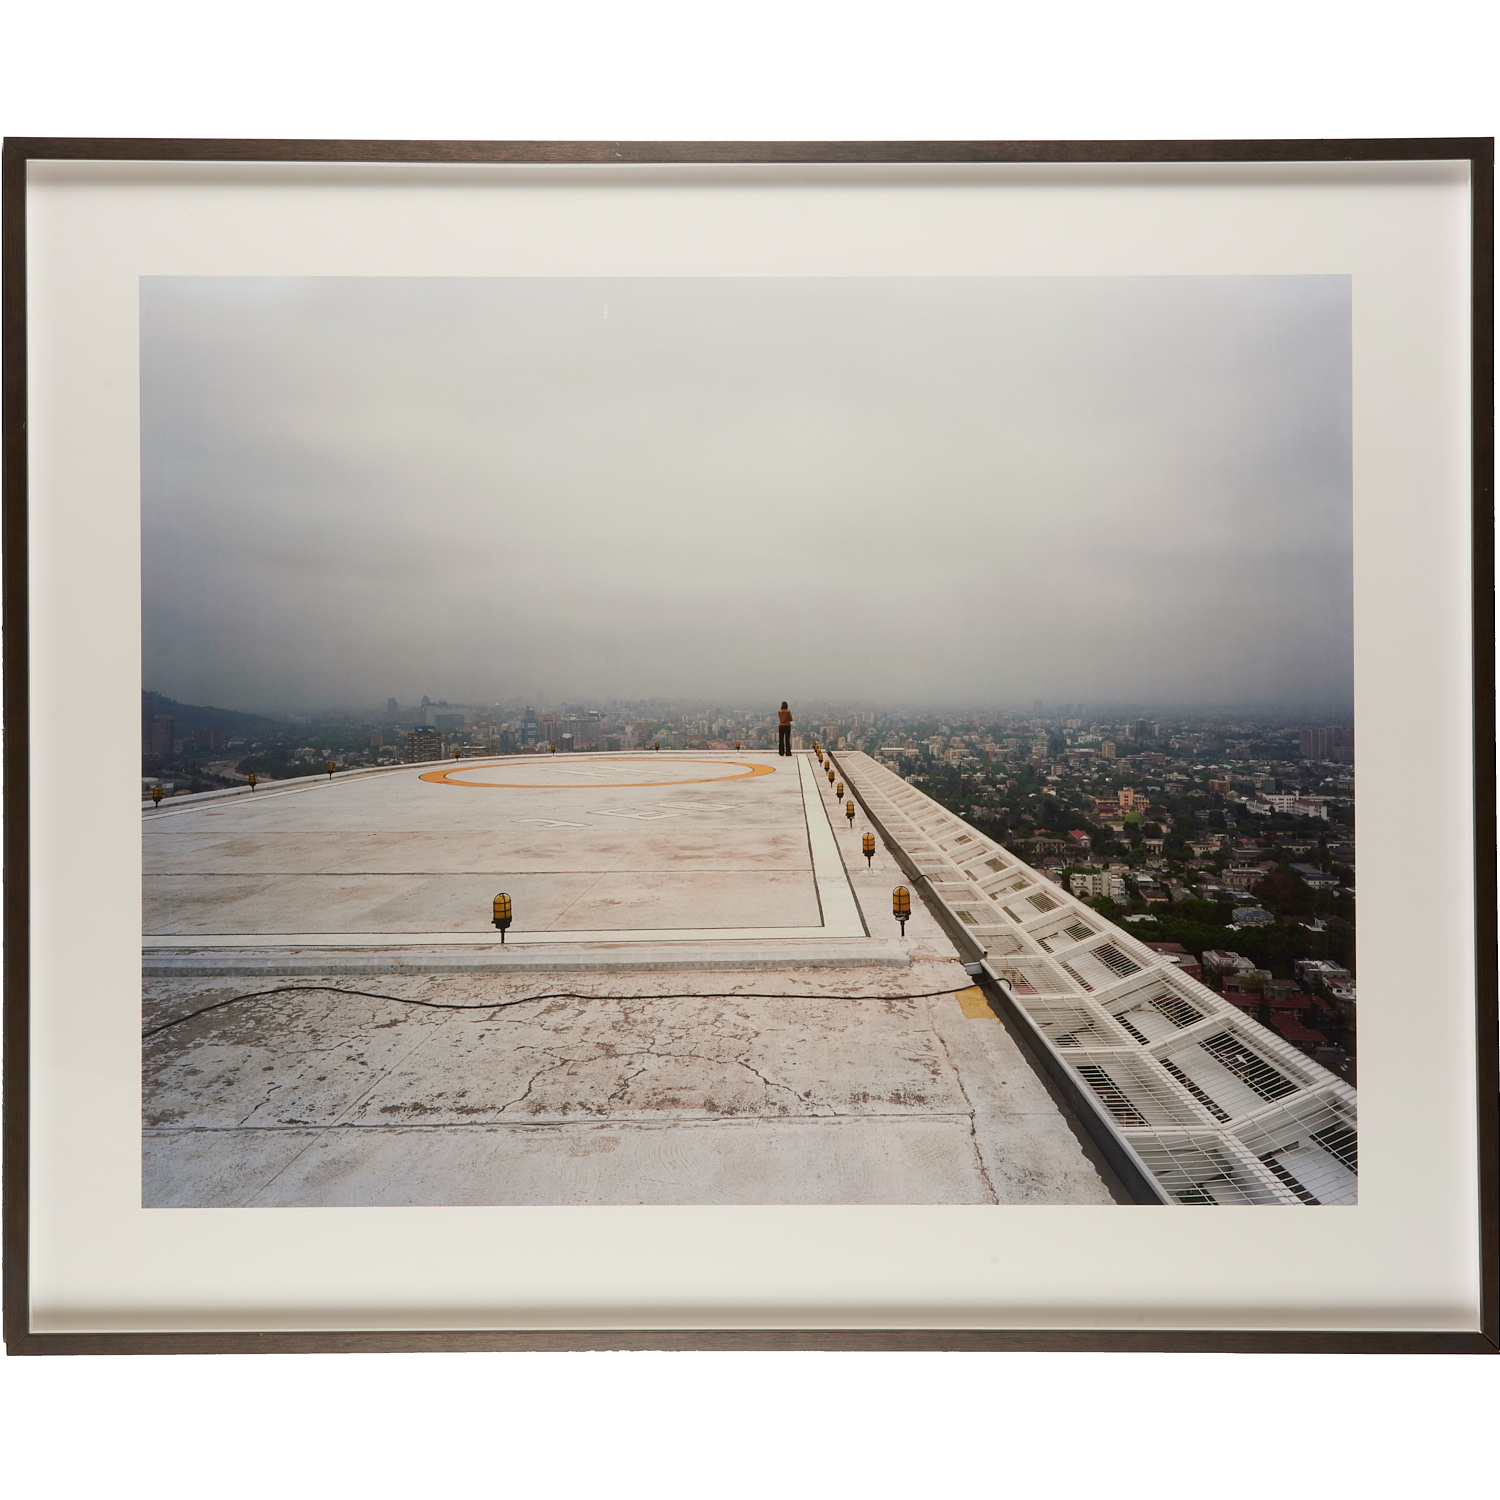 DAVID ALLEE, LARGE SCALE PHOTOGRAPH,